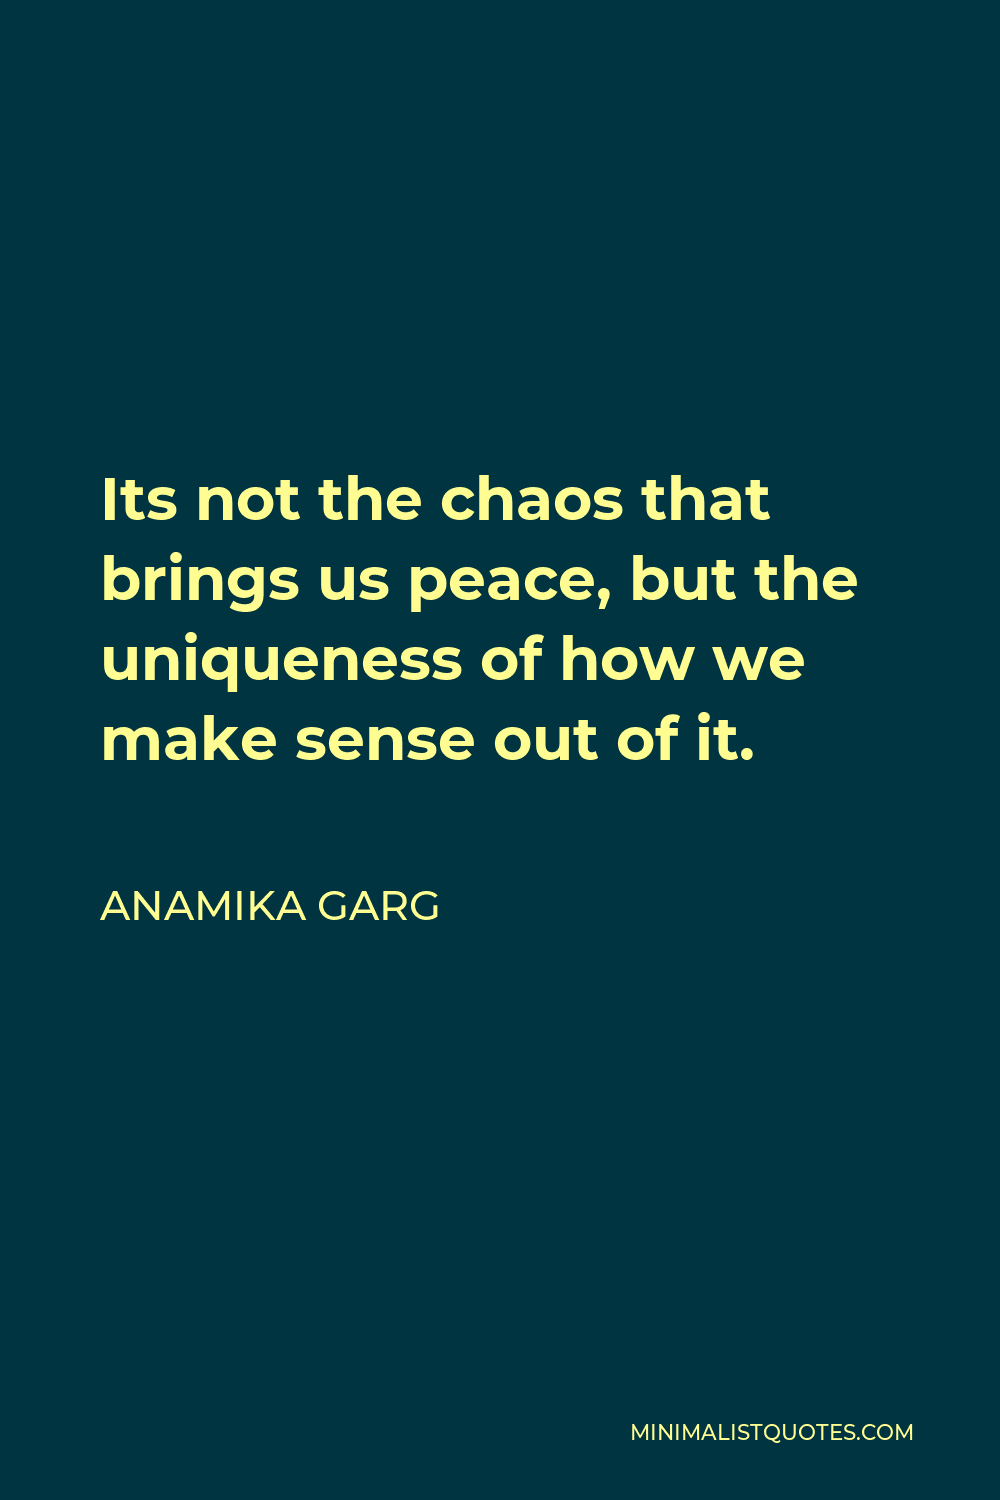 Anamika Garg Quote - Its not the chaos that brings us peace, but the uniqueness of how we make sense out of it.